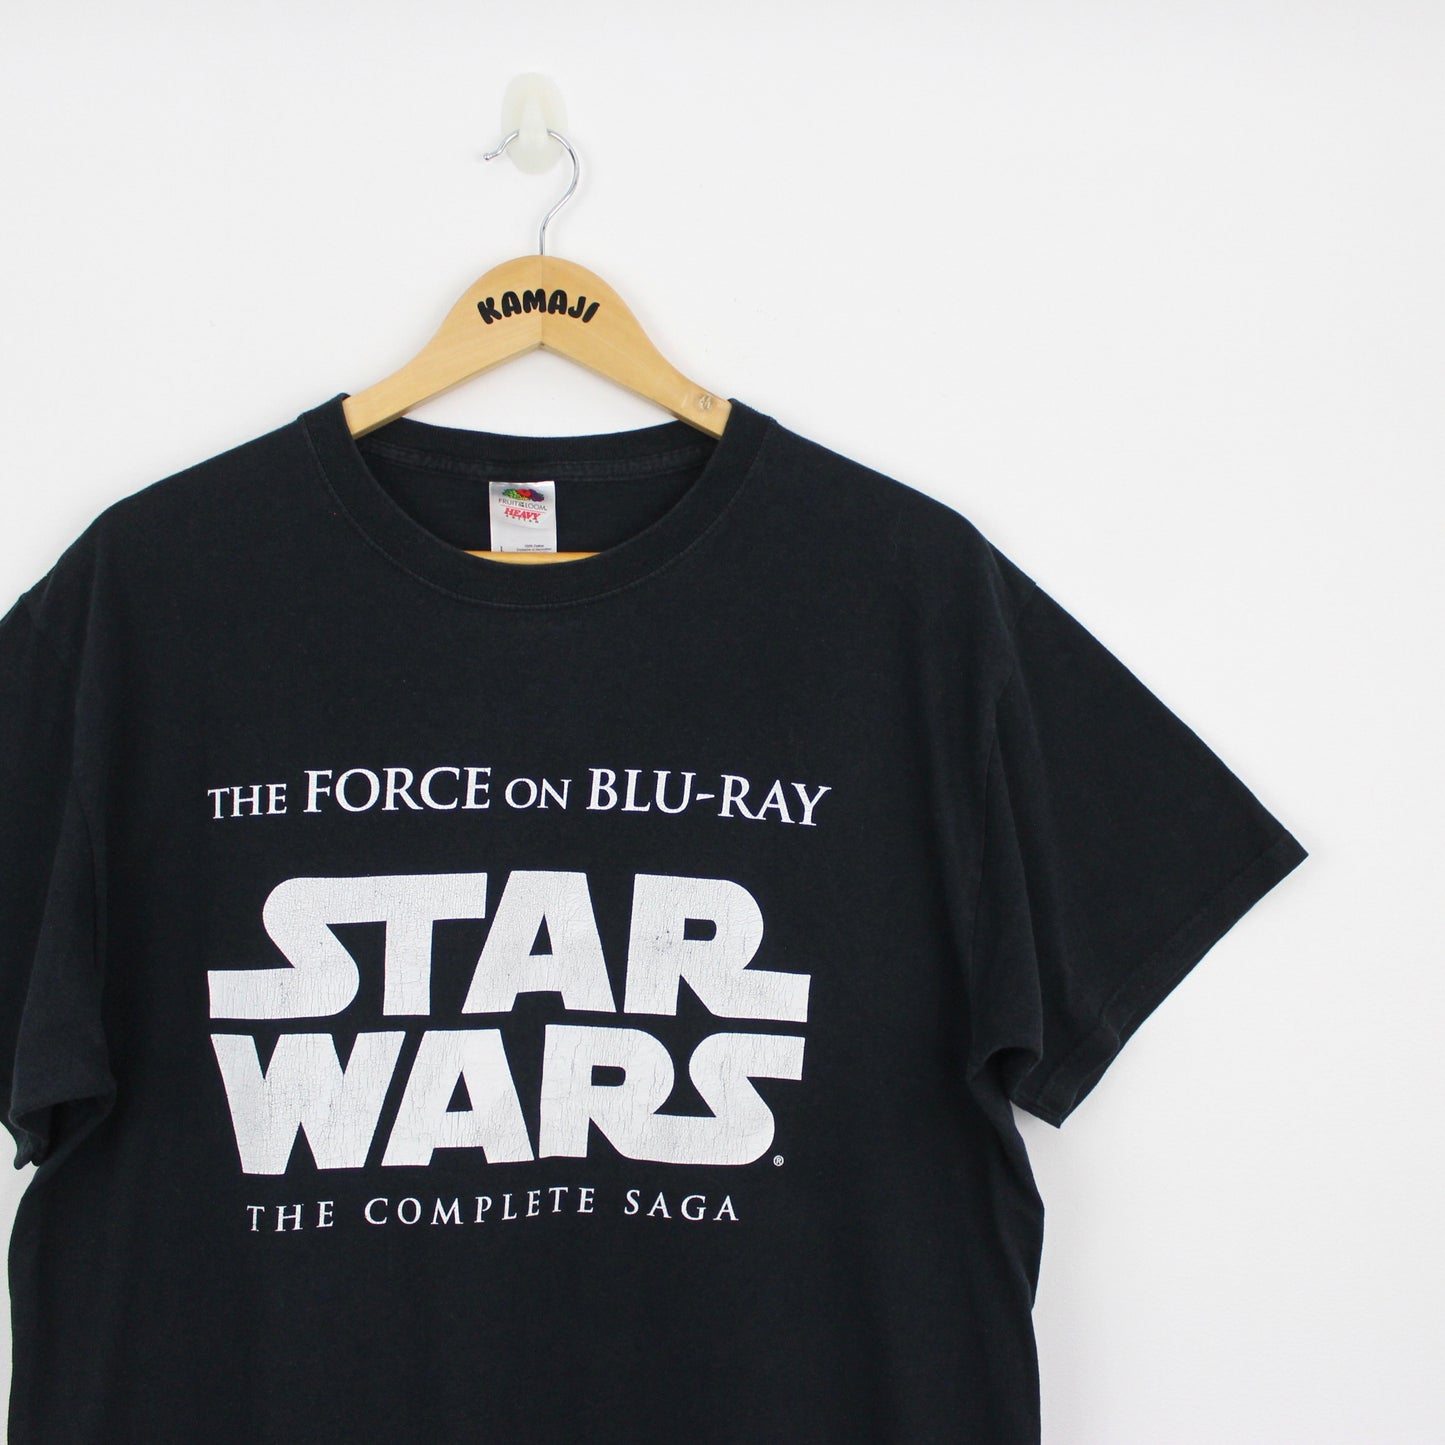 Star Wars Promo T-Shirt, Fruit of the Loom Tag (L)